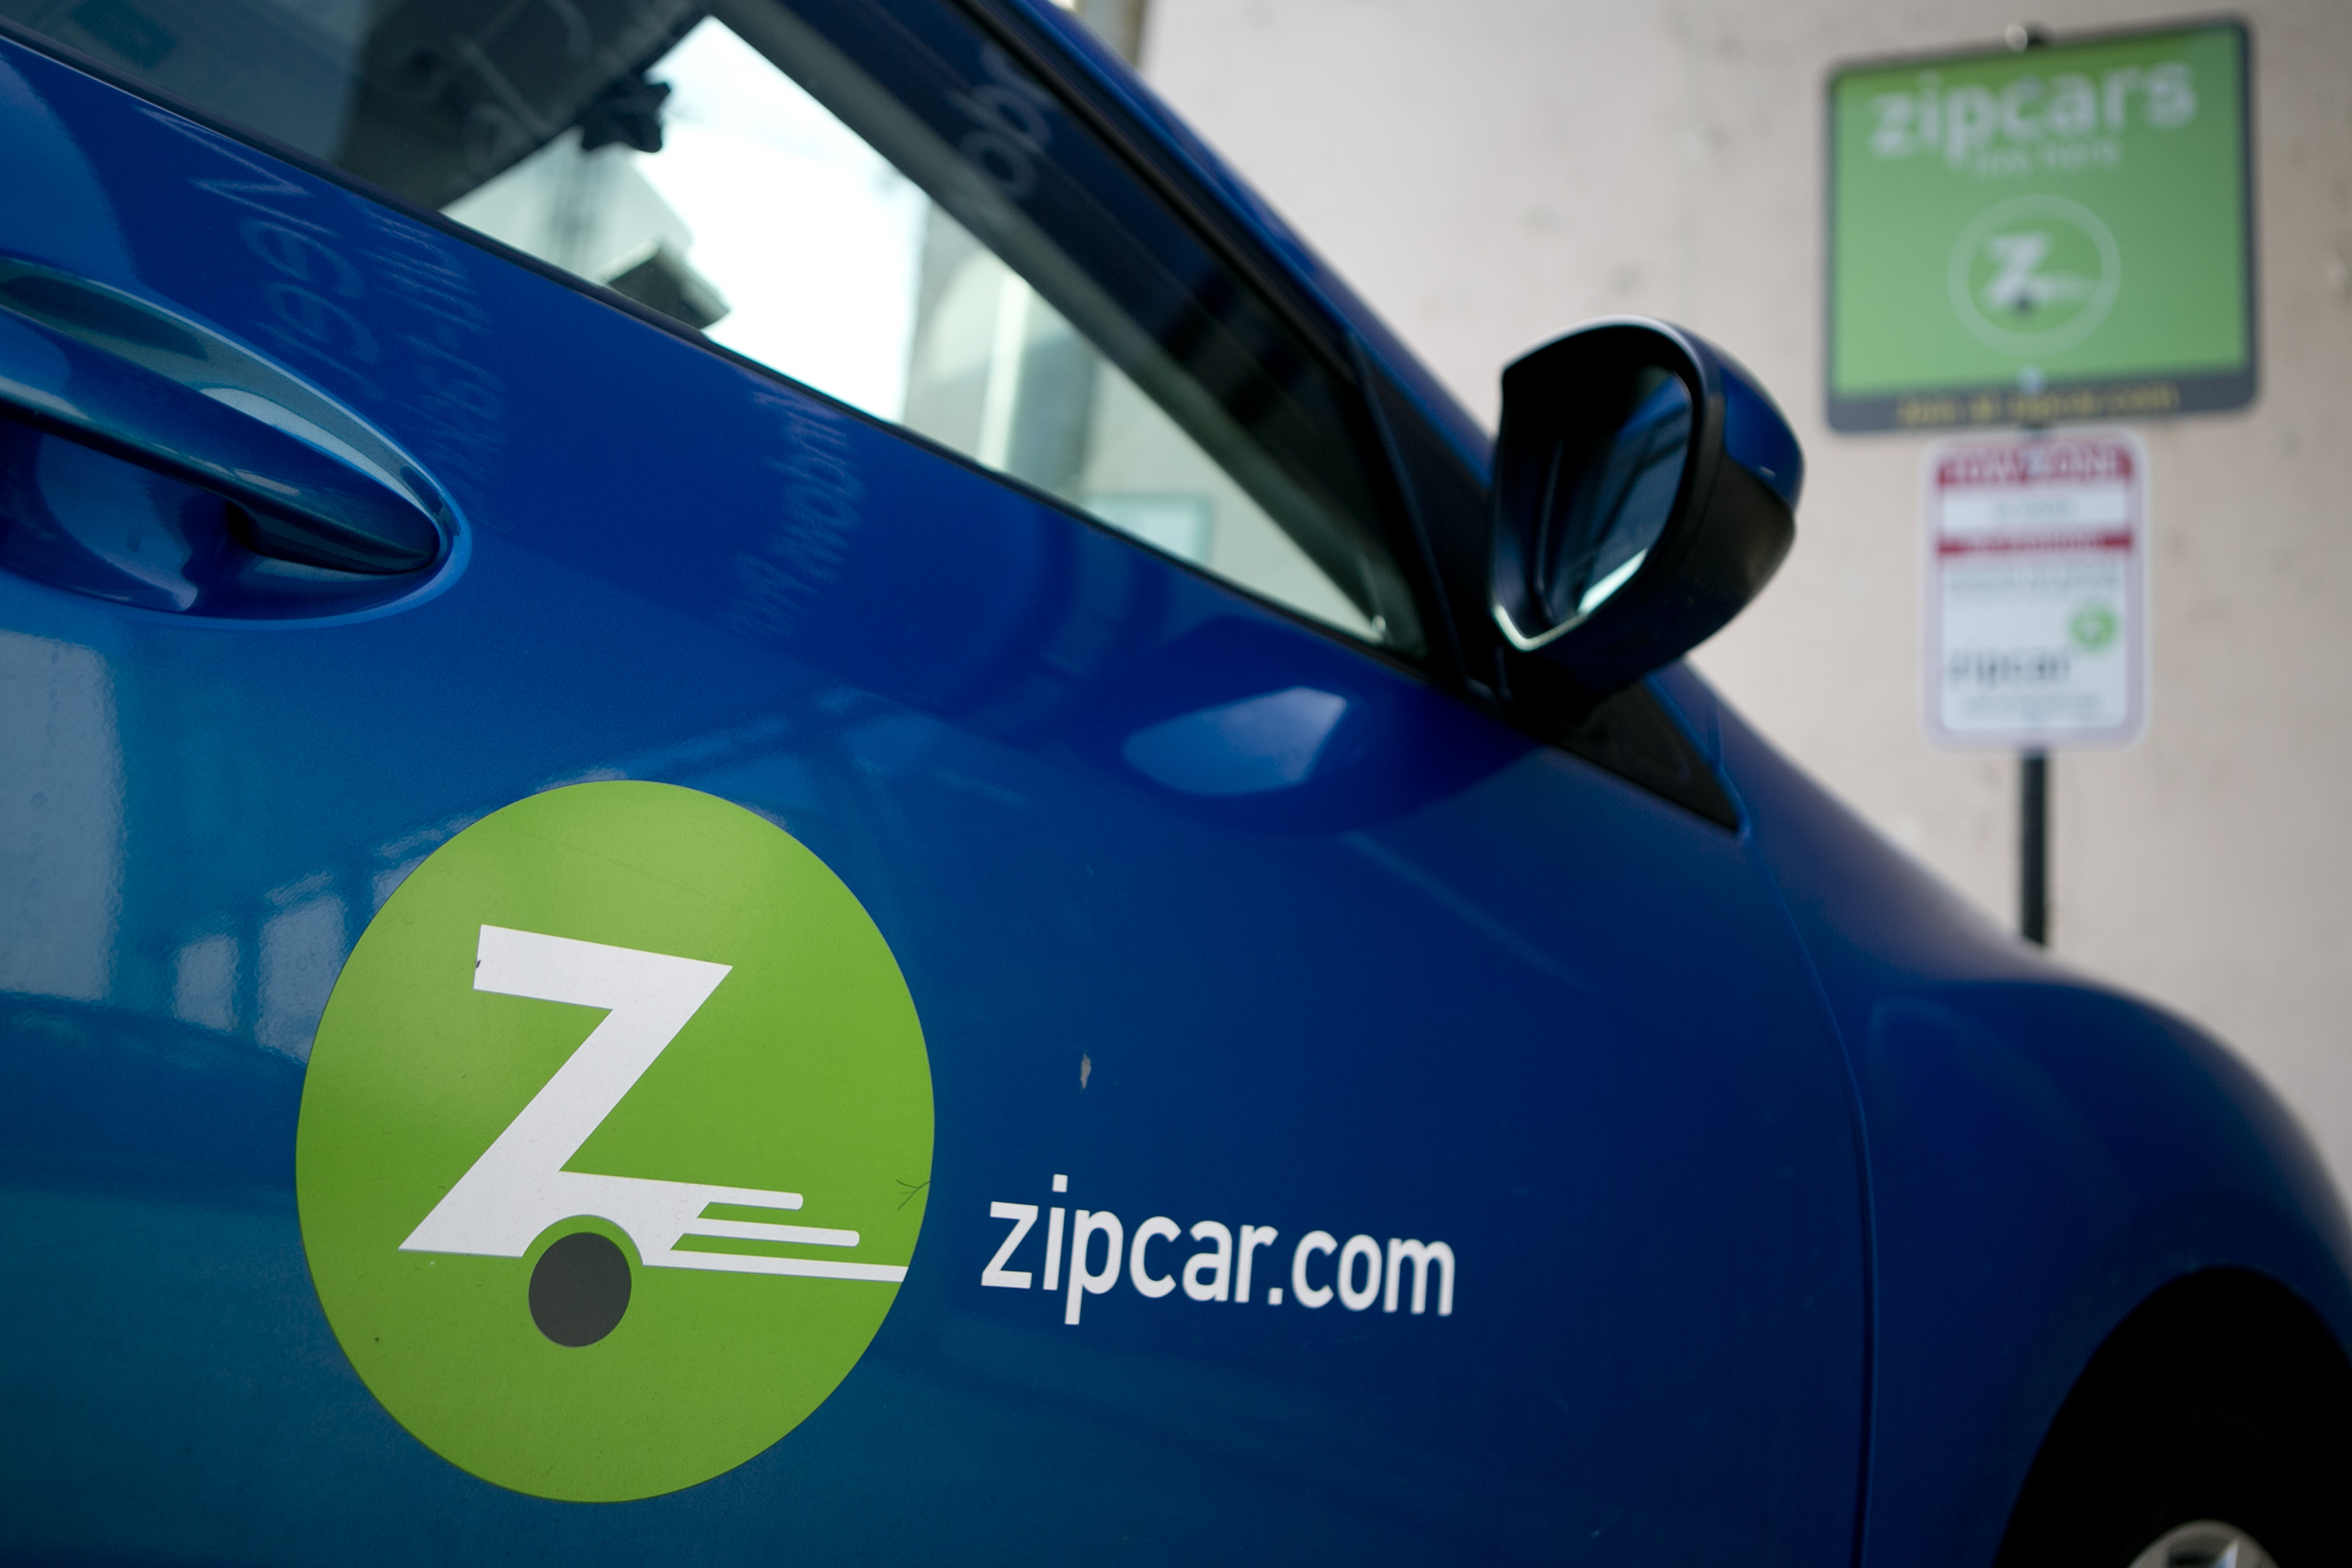 Avis to Acquire Car-Sharing Service Zipcar for $491 Million